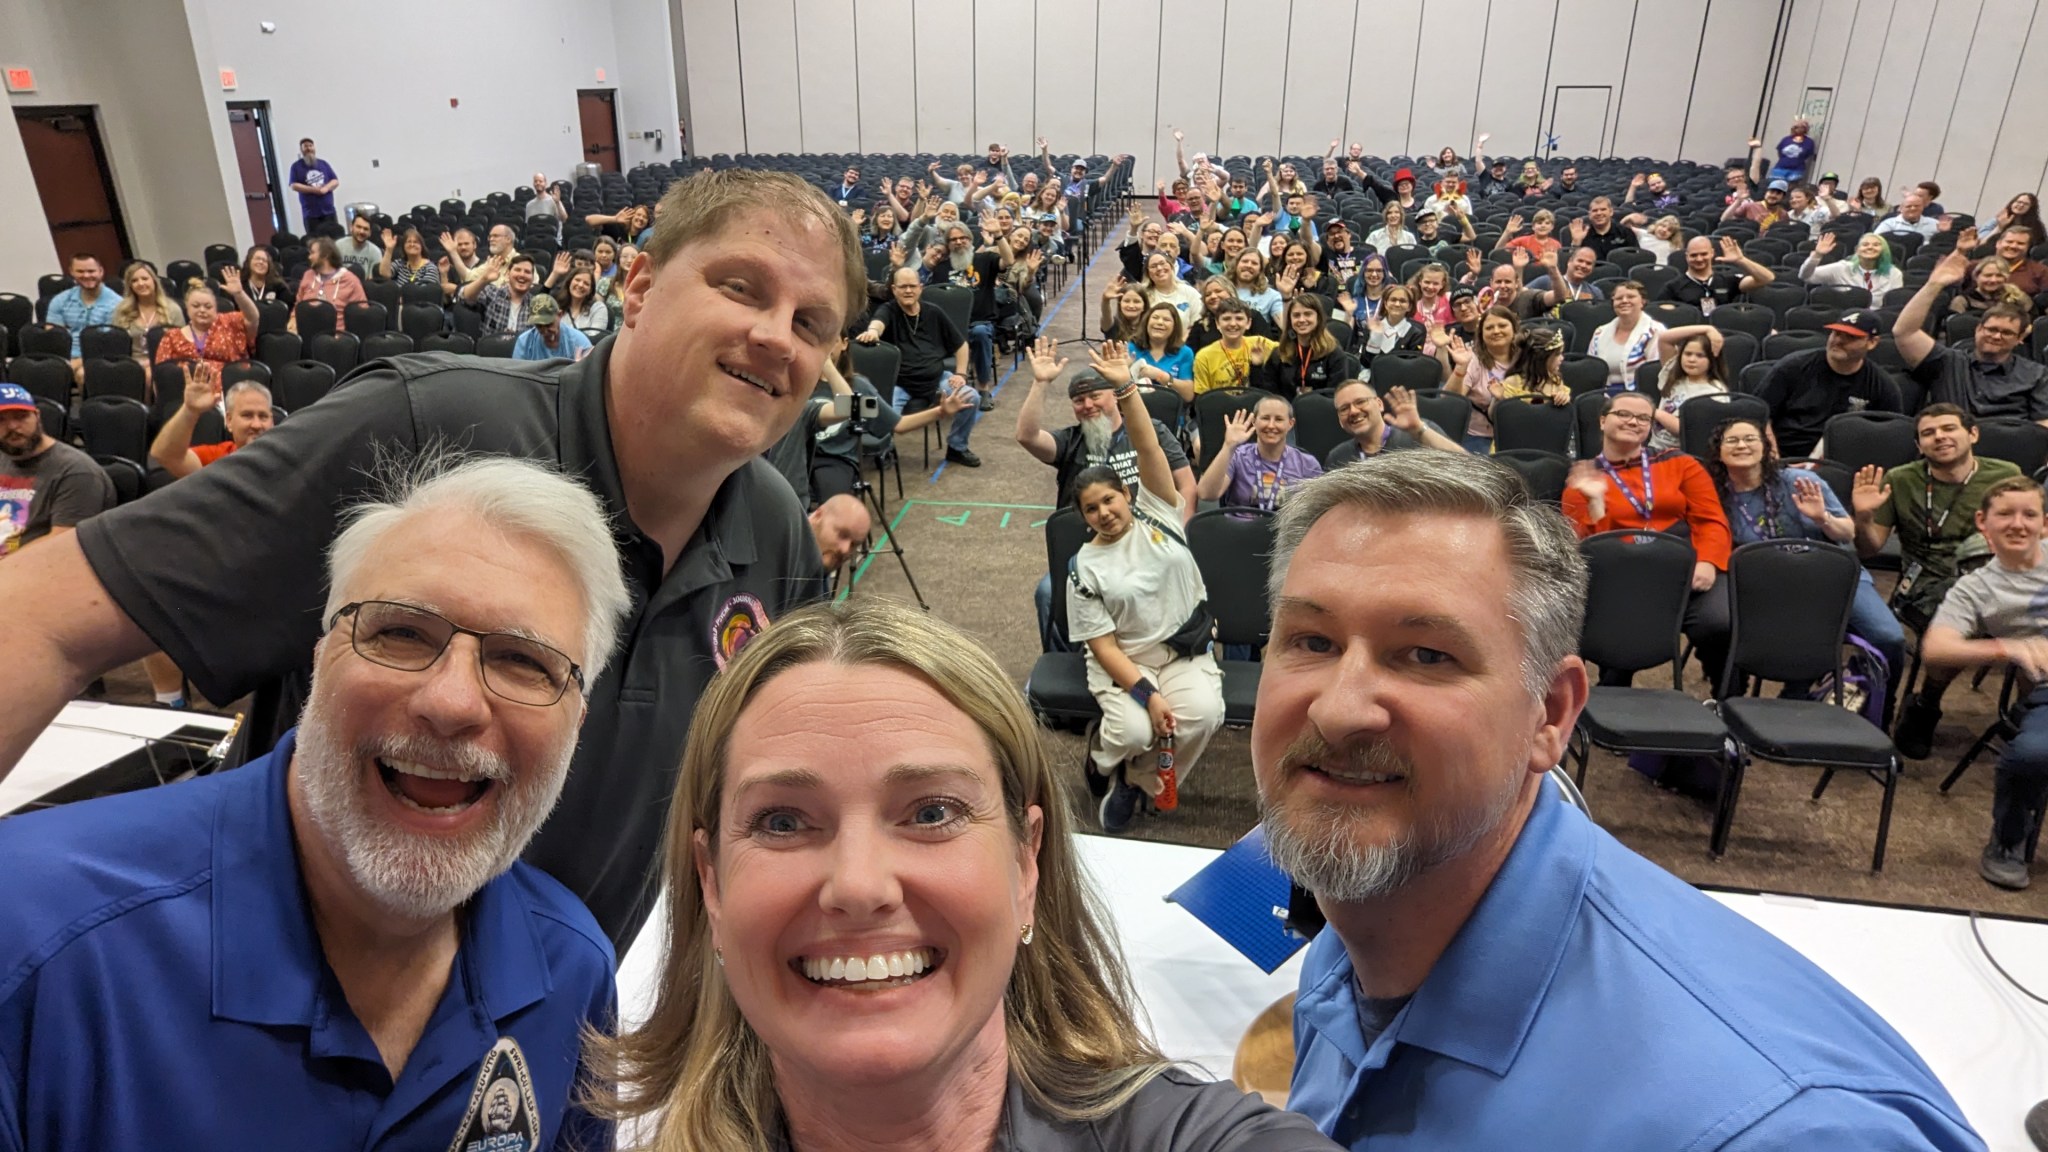 From left, Scott Bellamy, Brad Zavodsky, Solveig Irvine, and Brian Mulac pose for a selfie after speaking during a NASA science panel at the Huntsville Comic & Pop Culture Expo on April 13. The group discussed the upcoming science missions managed by the Planetary Missions Program Office.